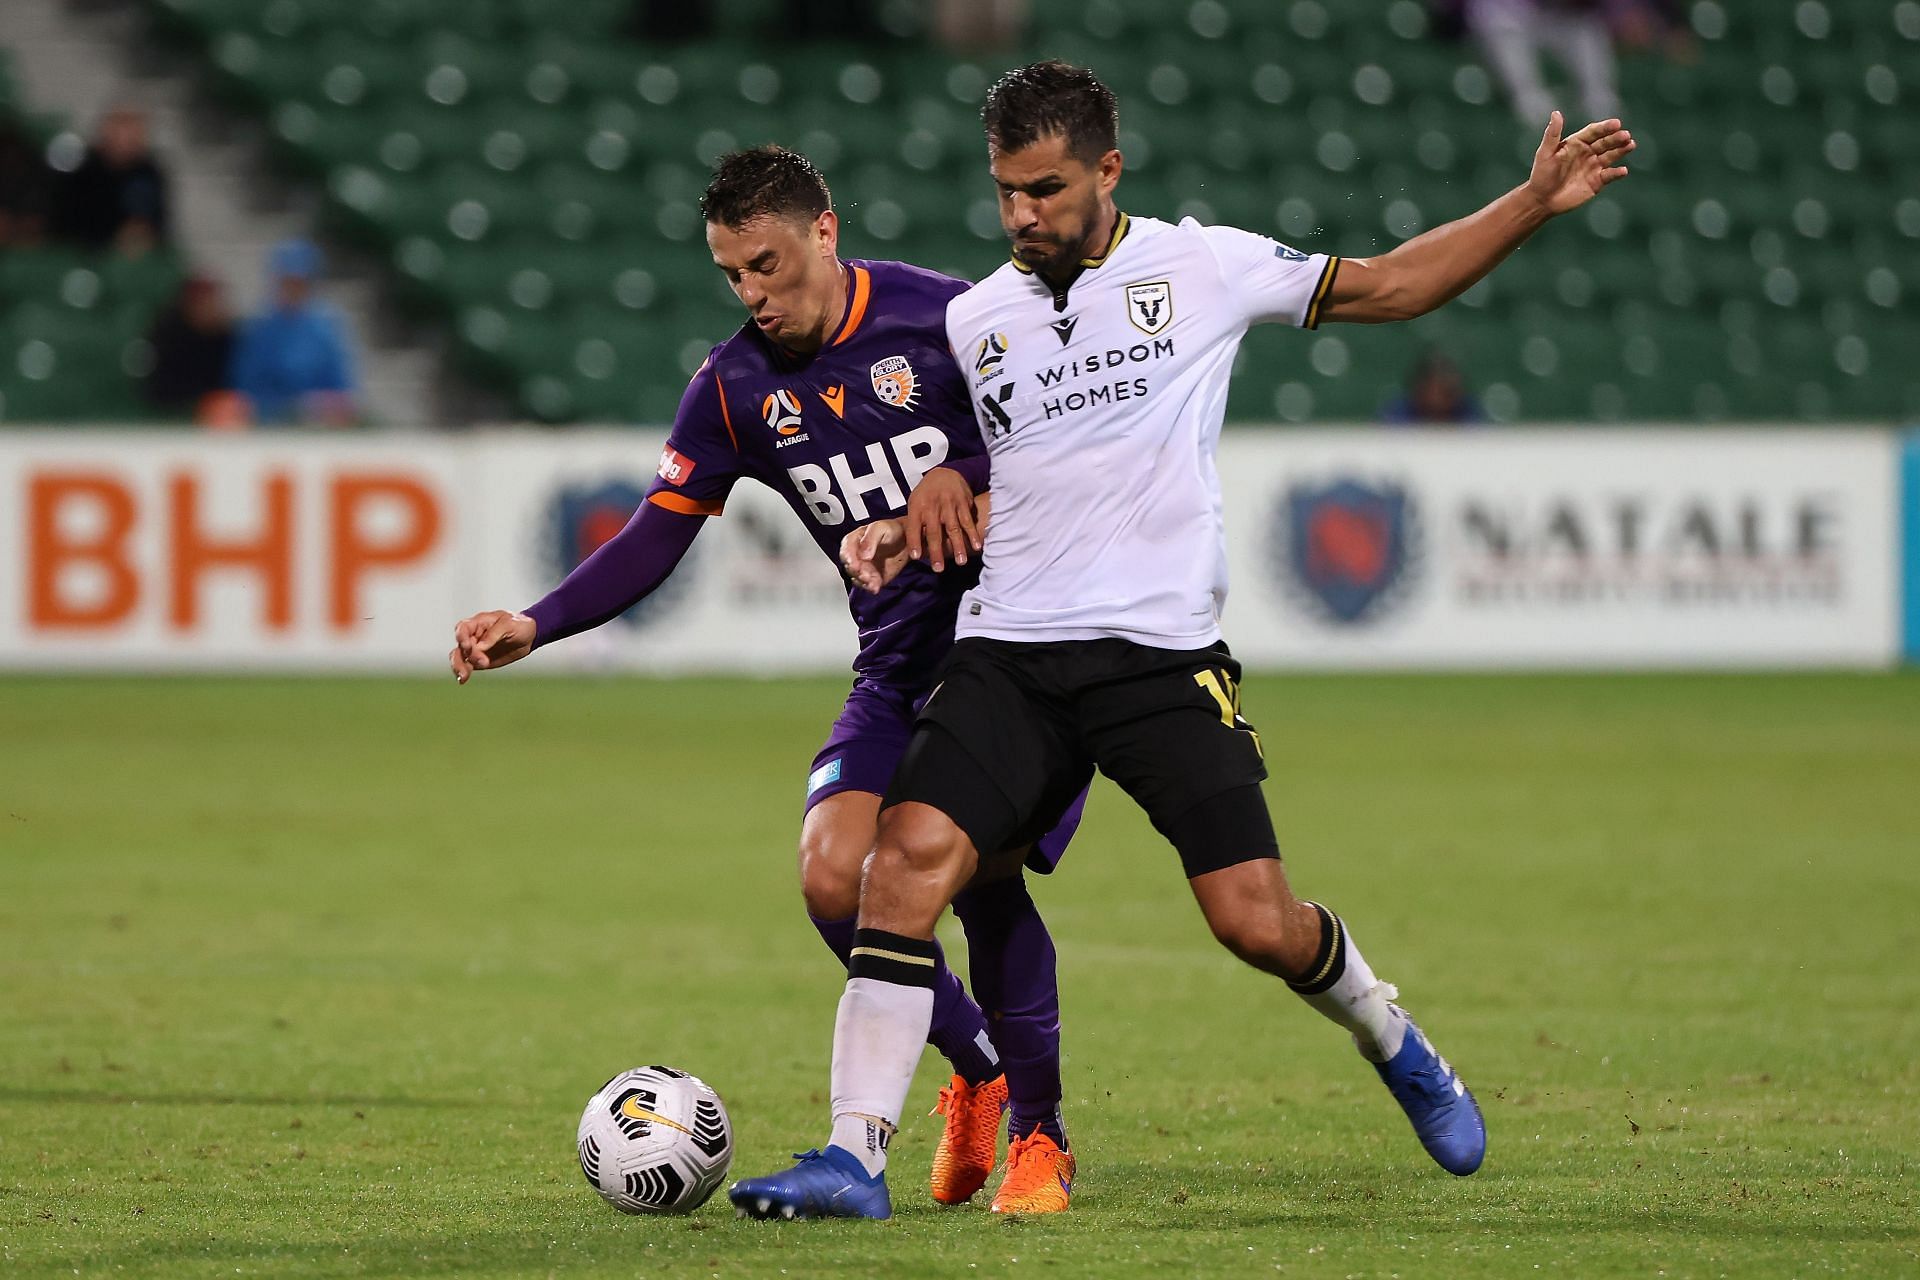 Perth Glory take on Macarthur FC this weekend